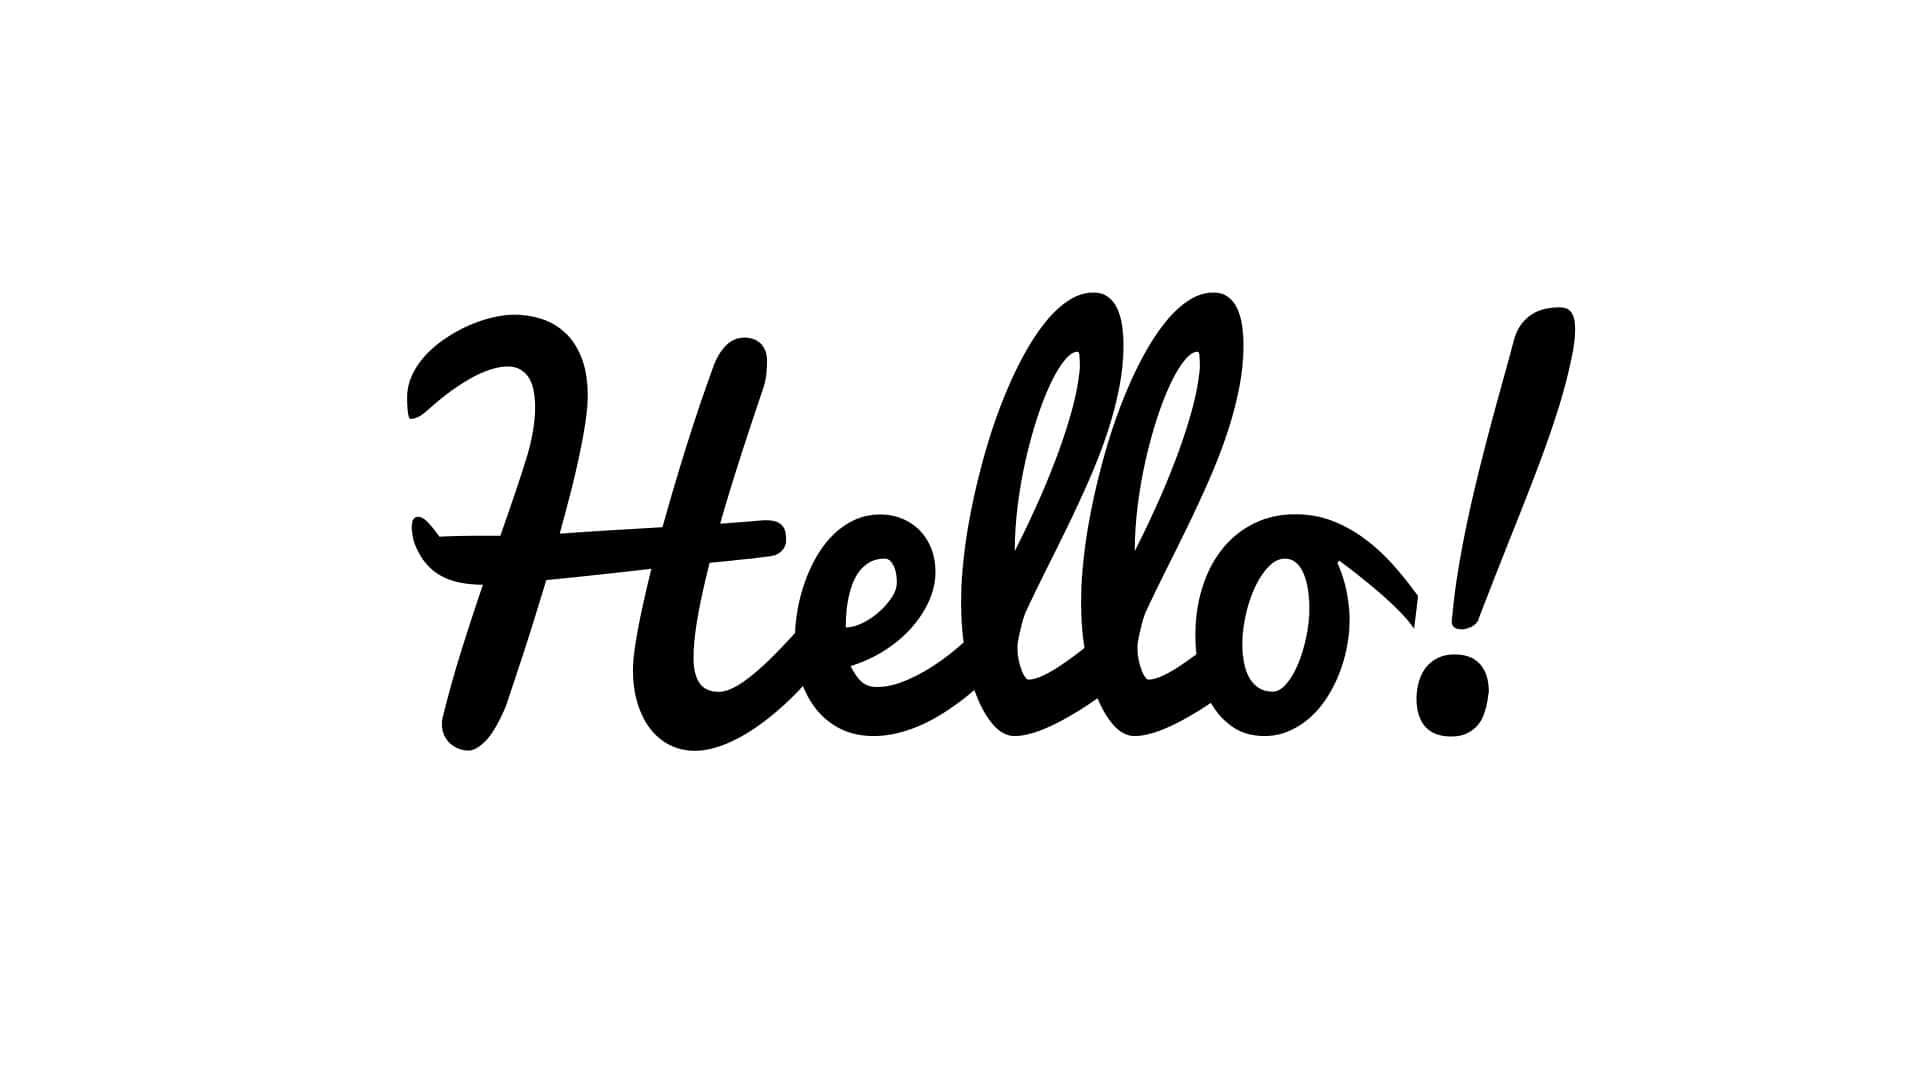 "Create a warm welcome with 'Hello'"